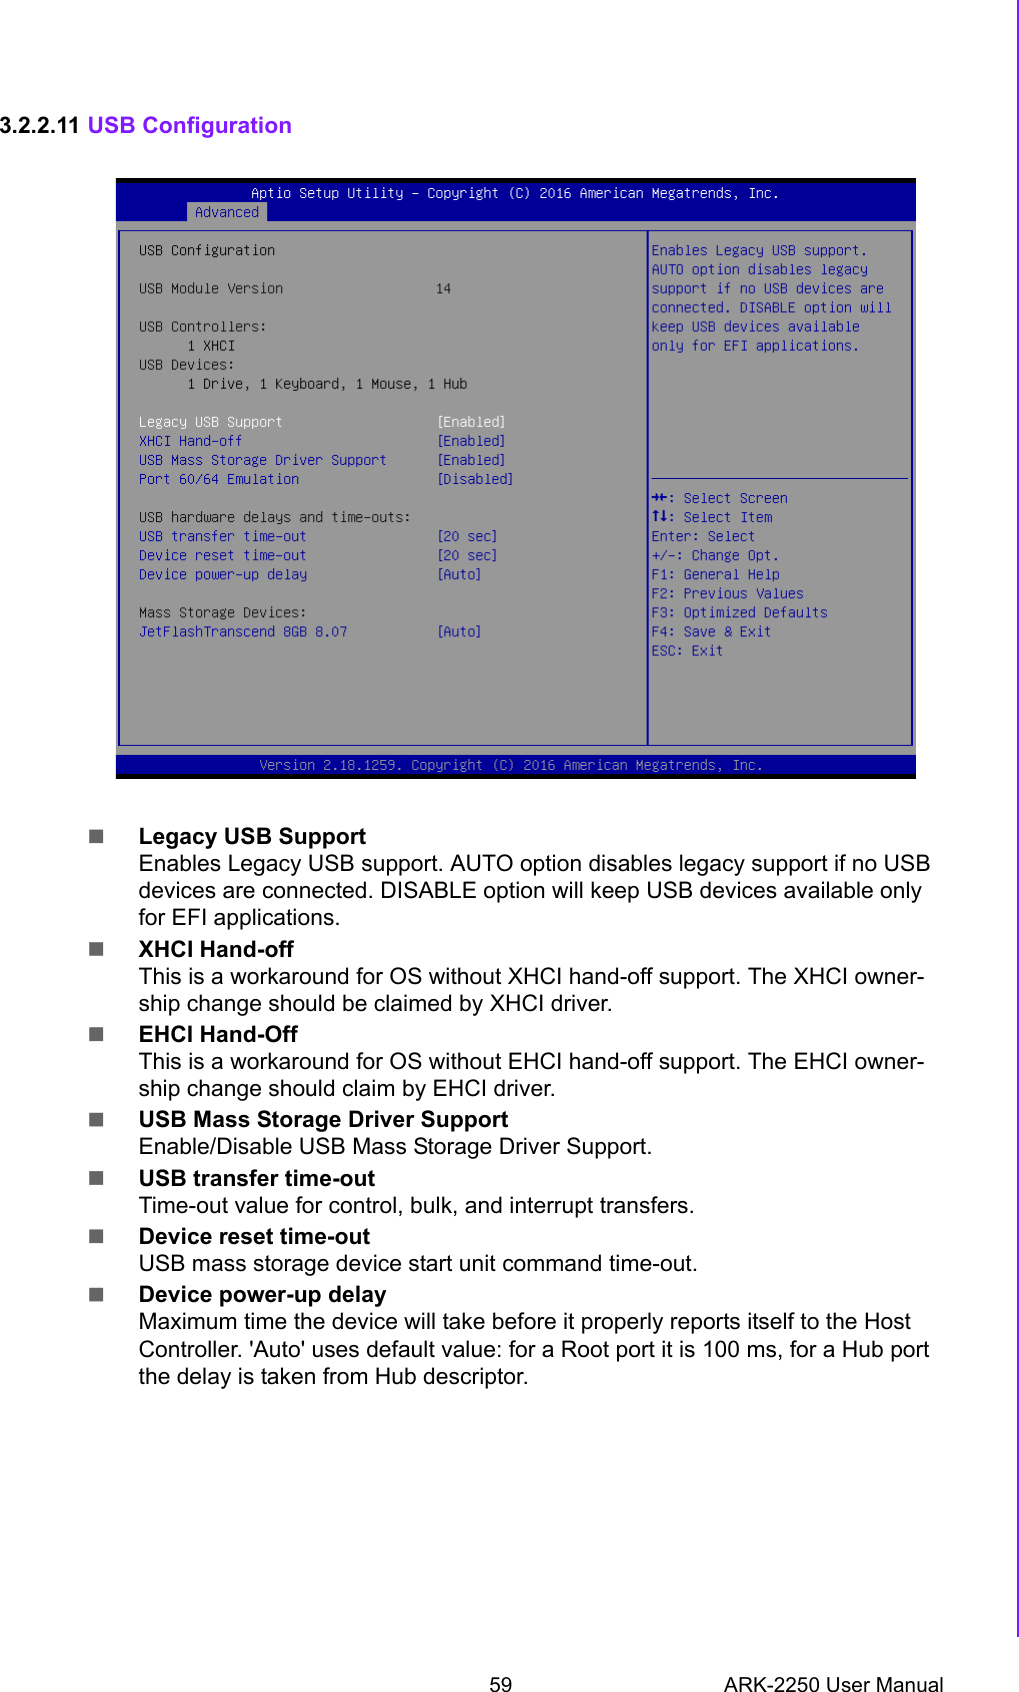 59 ARK-2250 User ManualChapter 3 BIOS Settings3.2.2.11 USB ConfigurationLegacy USB SupportEnables Legacy USB support. AUTO option disables legacy support if no USB devices are connected. DISABLE option will keep USB devices available only for EFI applications.XHCI Hand-offThis is a workaround for OS without XHCI hand-off support. The XHCI owner-ship change should be claimed by XHCI driver.EHCI Hand-OffThis is a workaround for OS without EHCI hand-off support. The EHCI owner-ship change should claim by EHCI driver.USB Mass Storage Driver SupportEnable/Disable USB Mass Storage Driver Support.USB transfer time-outTime-out value for control, bulk, and interrupt transfers.Device reset time-outUSB mass storage device start unit command time-out.Device power-up delayMaximum time the device will take before it properly reports itself to the Host Controller. &apos;Auto&apos; uses default value: for a Root port it is 100 ms, for a Hub port the delay is taken from Hub descriptor.